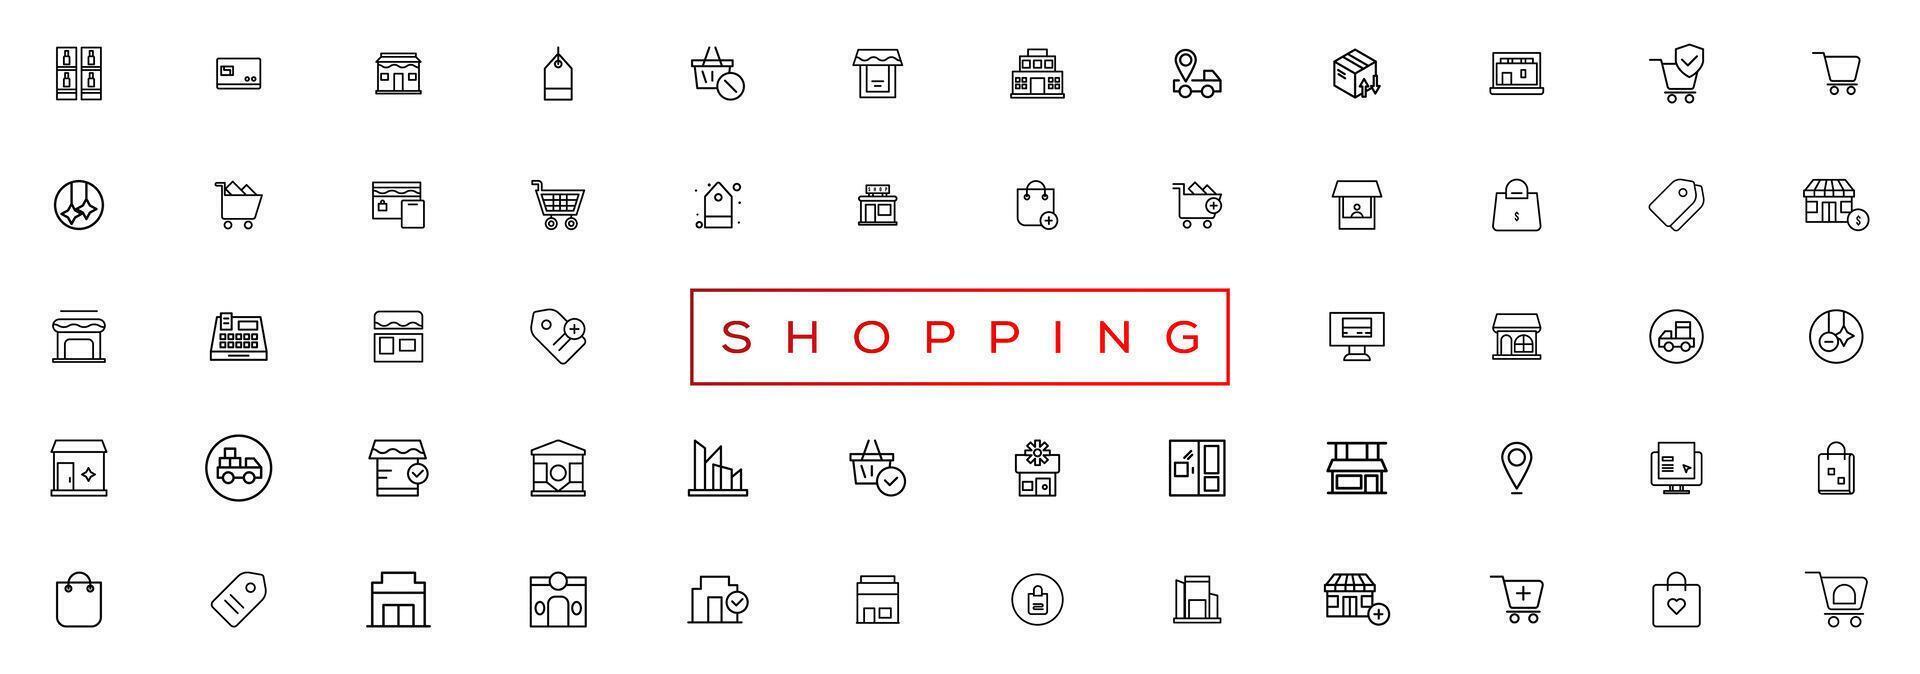 Shopping and retail line icons set. E-Commerce and retail outline icons collection. Shopping, gifts, store, shop, delivery, marketing, store, money, price vector